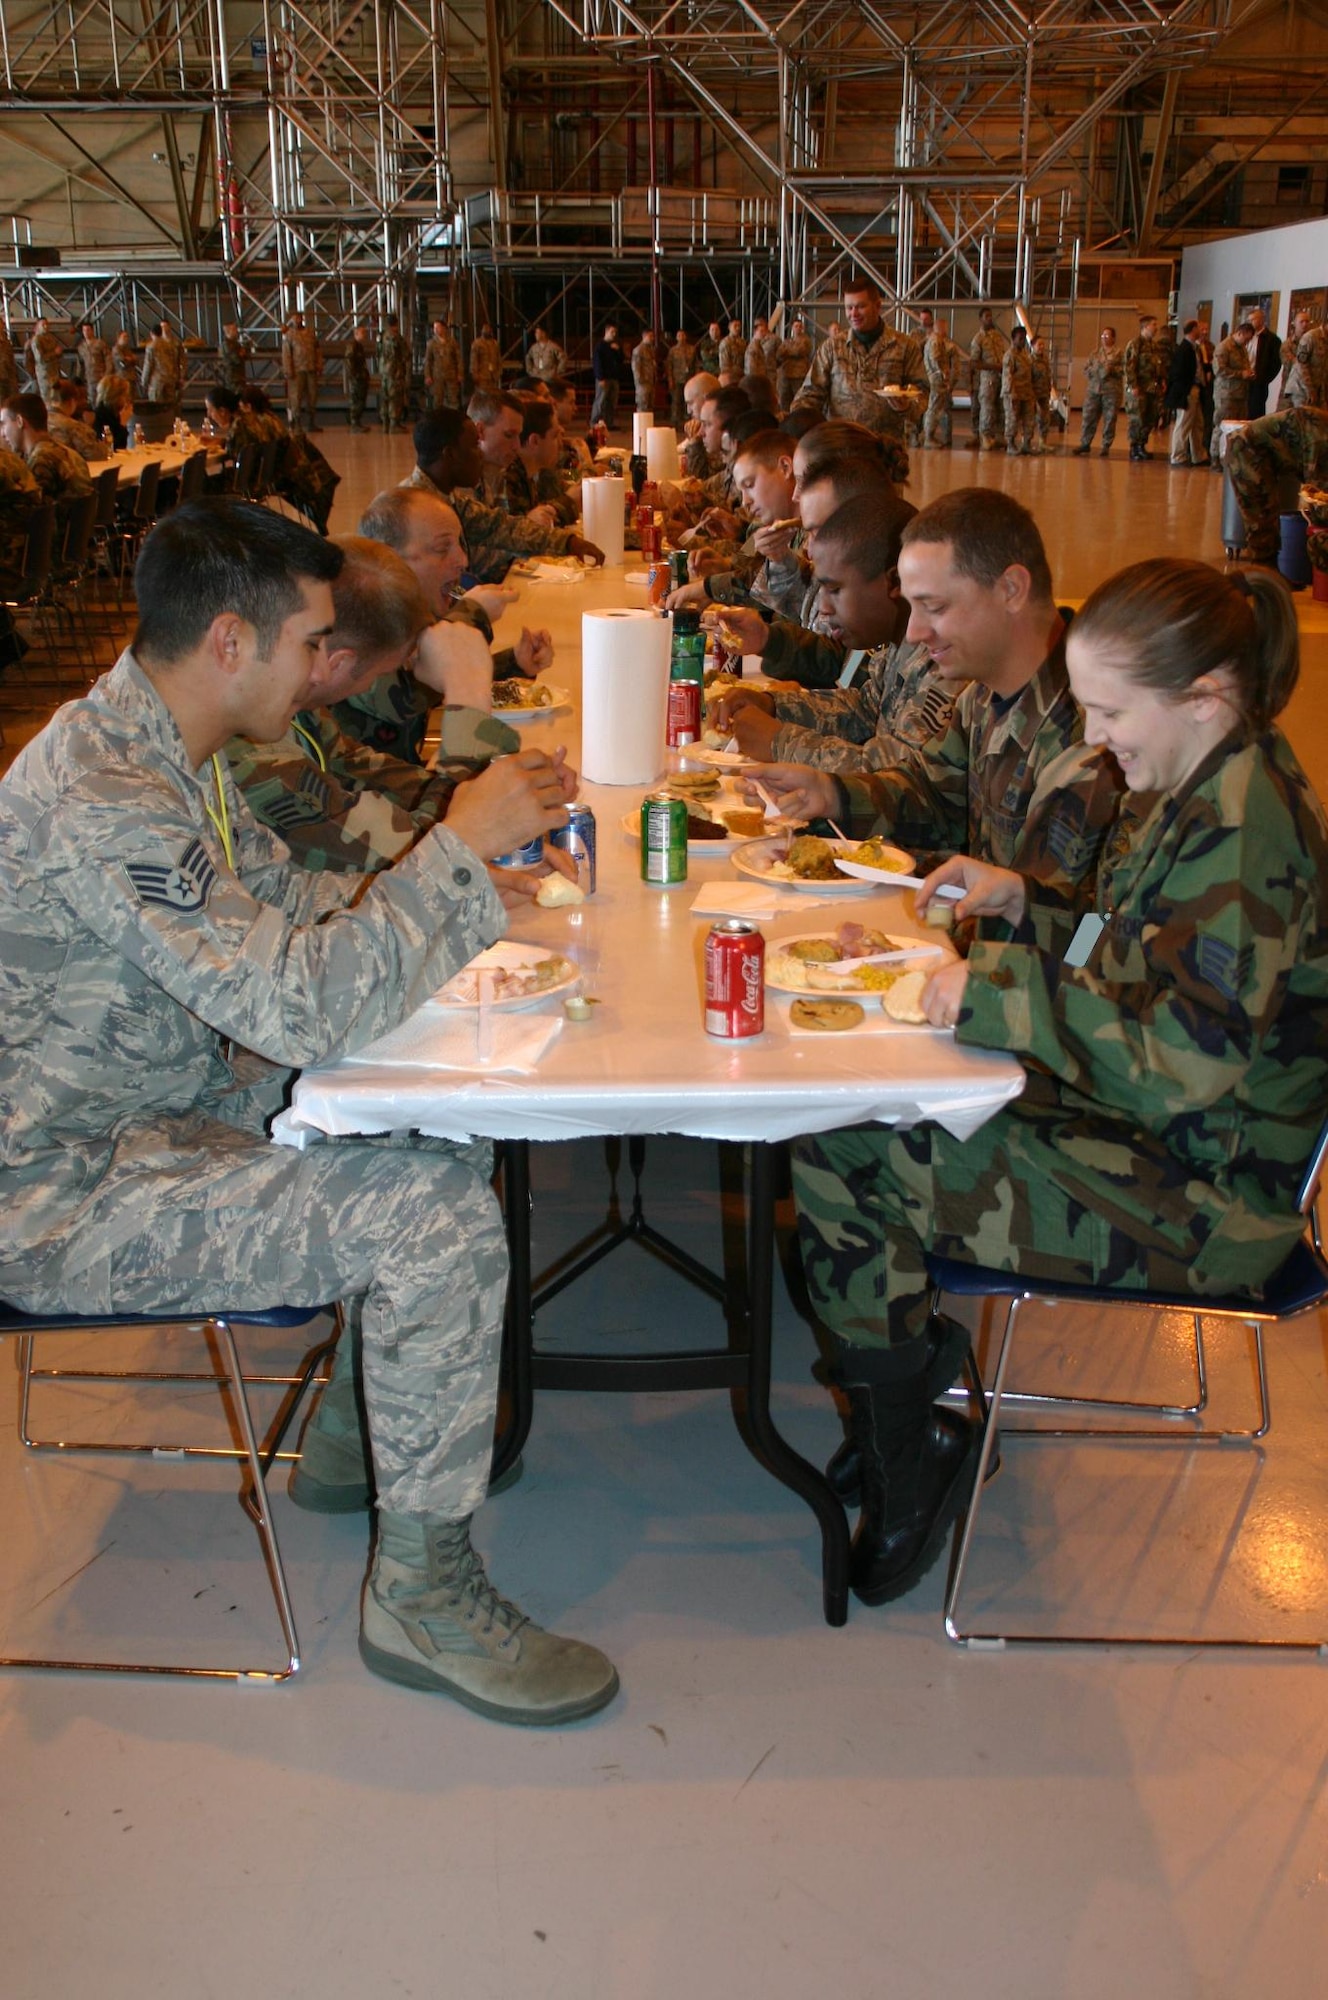 Airmen from the 552nd Maintenance Group enjoy plates piled high of turkey and all the fixings at the annual MXG Turkey Feast November 20. Photo compliments of 1st Lt. Kinder Blacke.